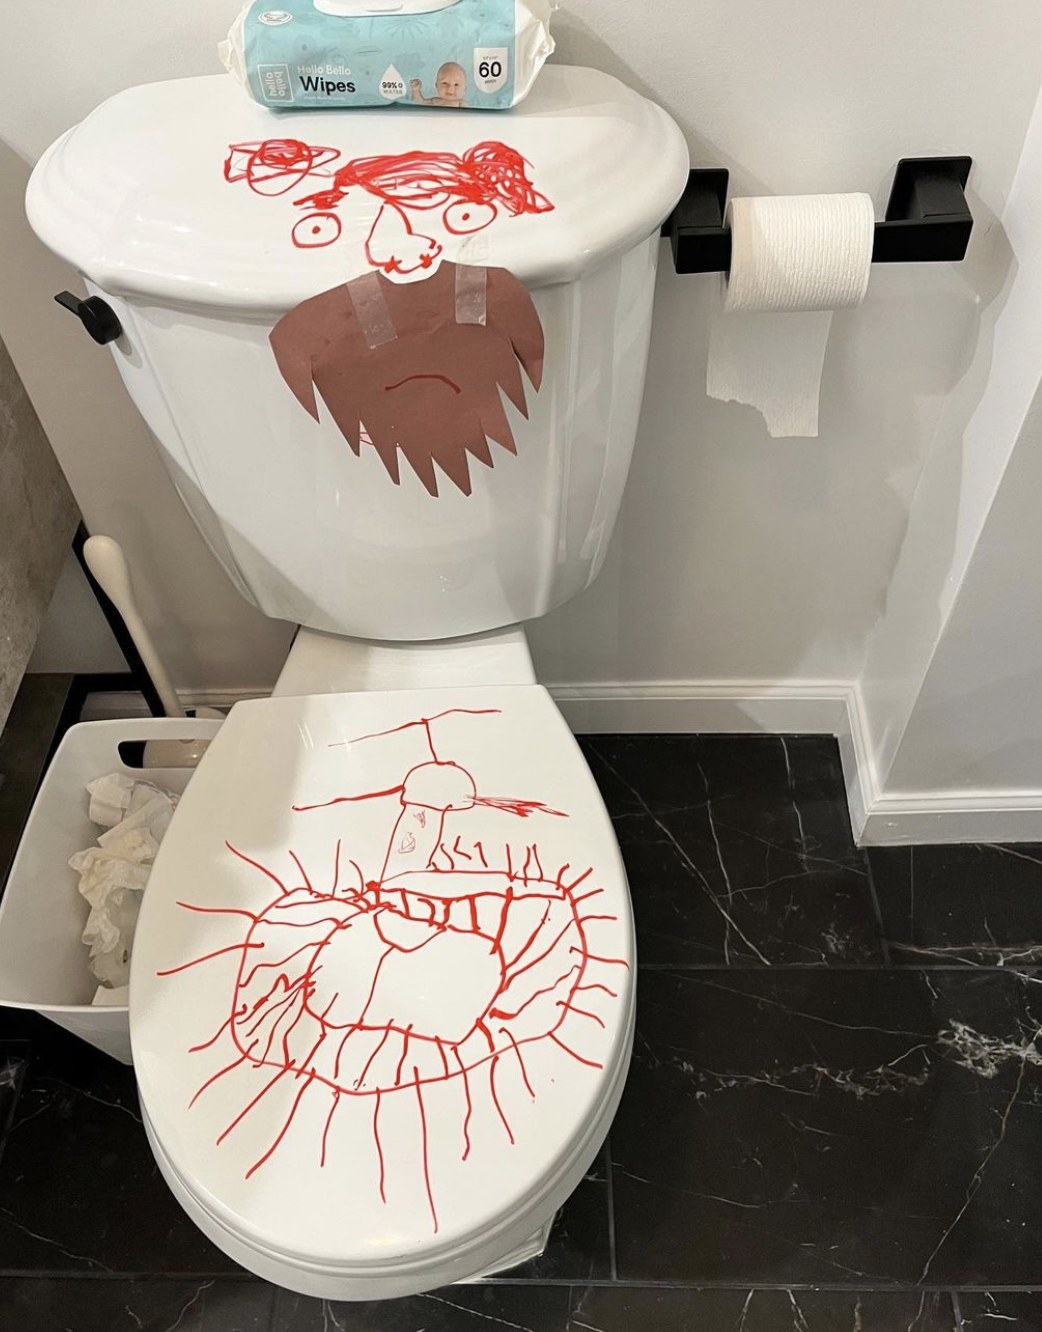 A toilet with a red face drawn on the top and scribbles on the seat